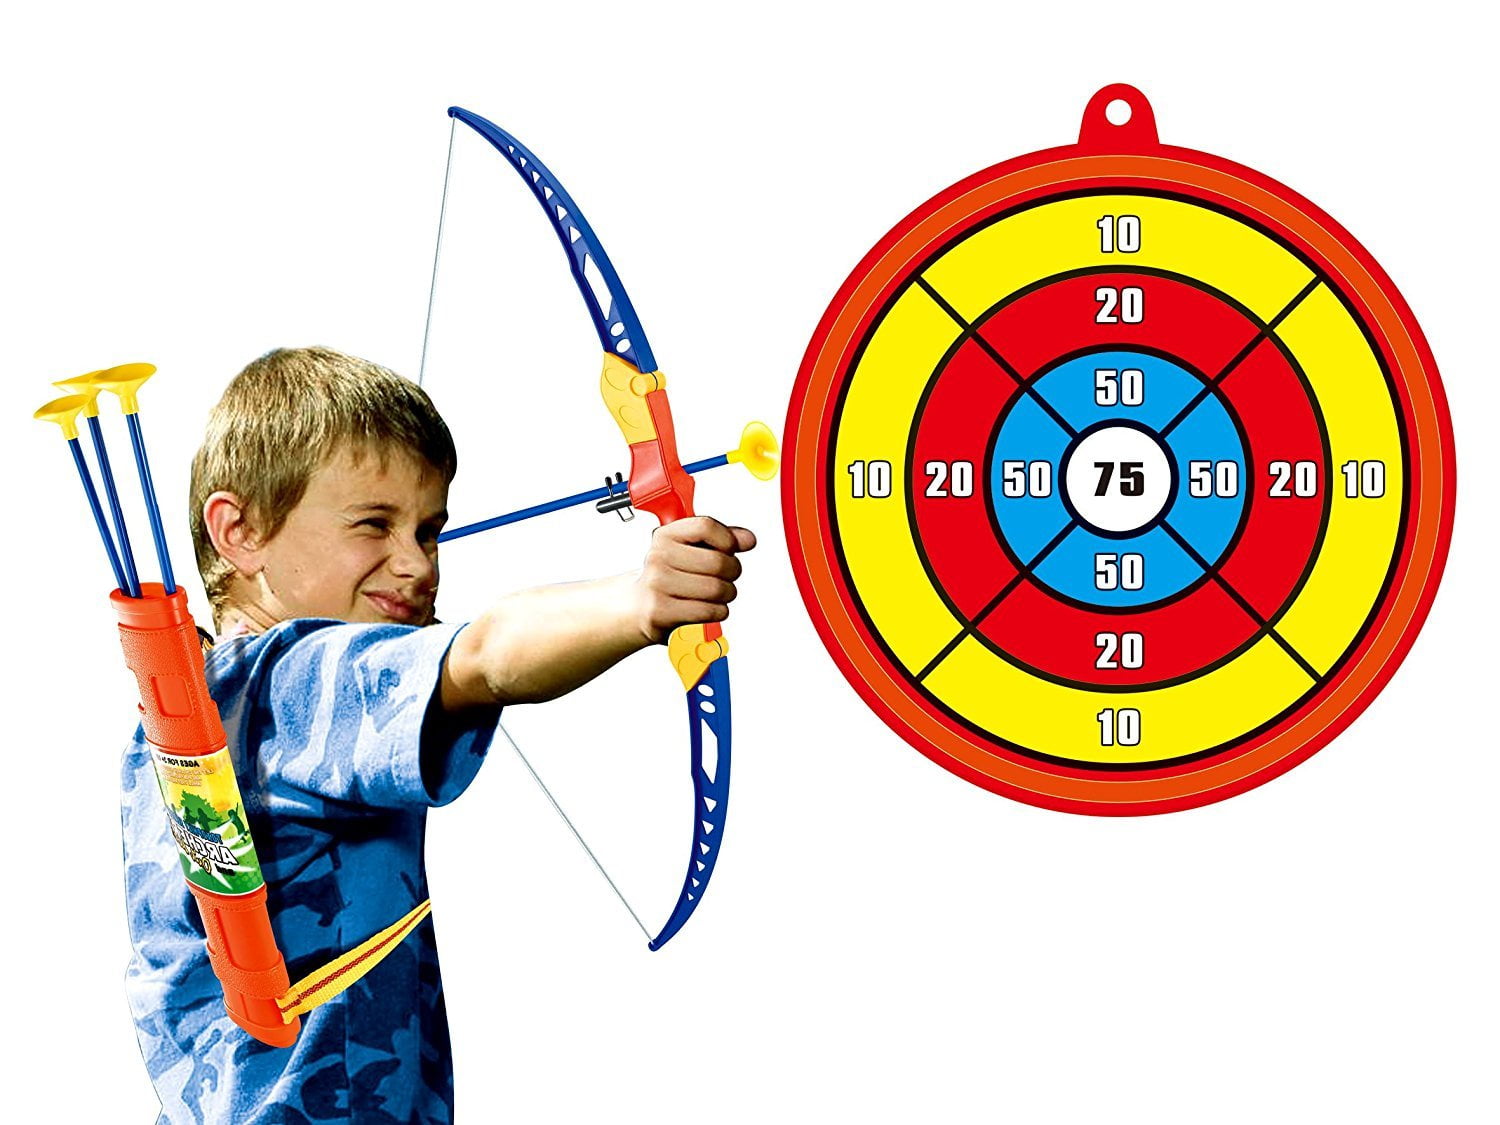 Toy Archery Set for Kids W Target Bow & Arrow Toys Age 5 6 7 8 9 Years Old Boys for sale online